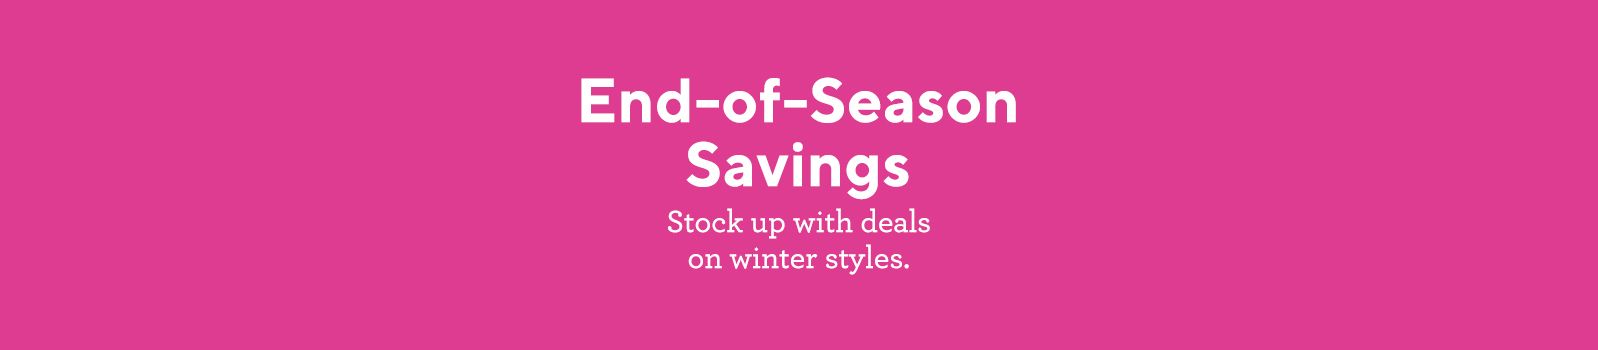 End-of-Season Stock up with deals on winter styles.